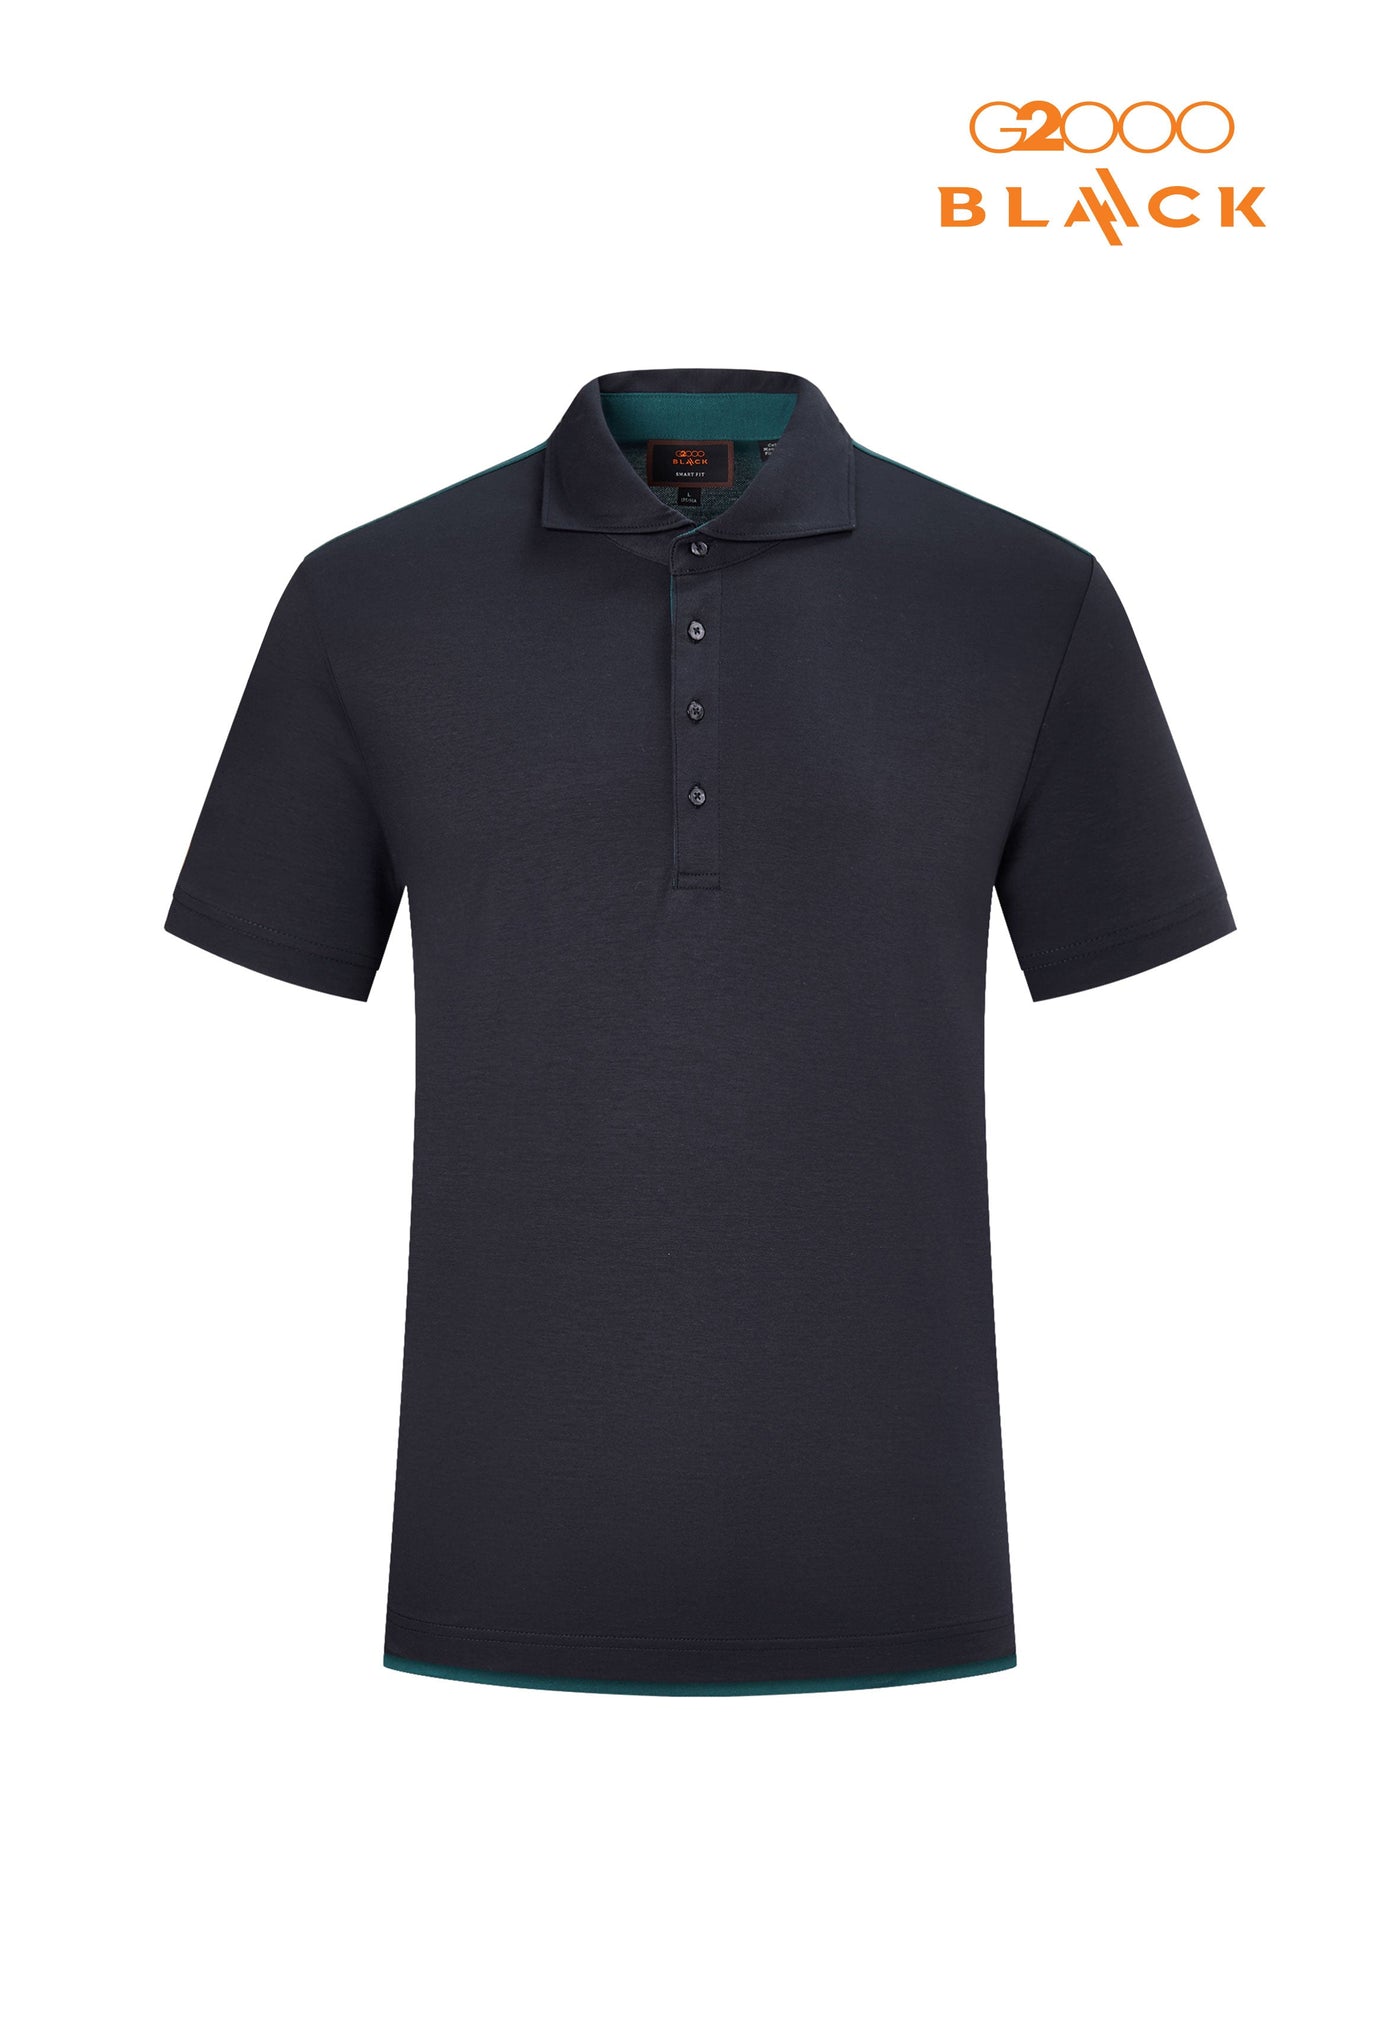 Men Clothing "Blaack" Placket Cotton Silk Blend Jersey Polo With Back Blocking Smart Fit